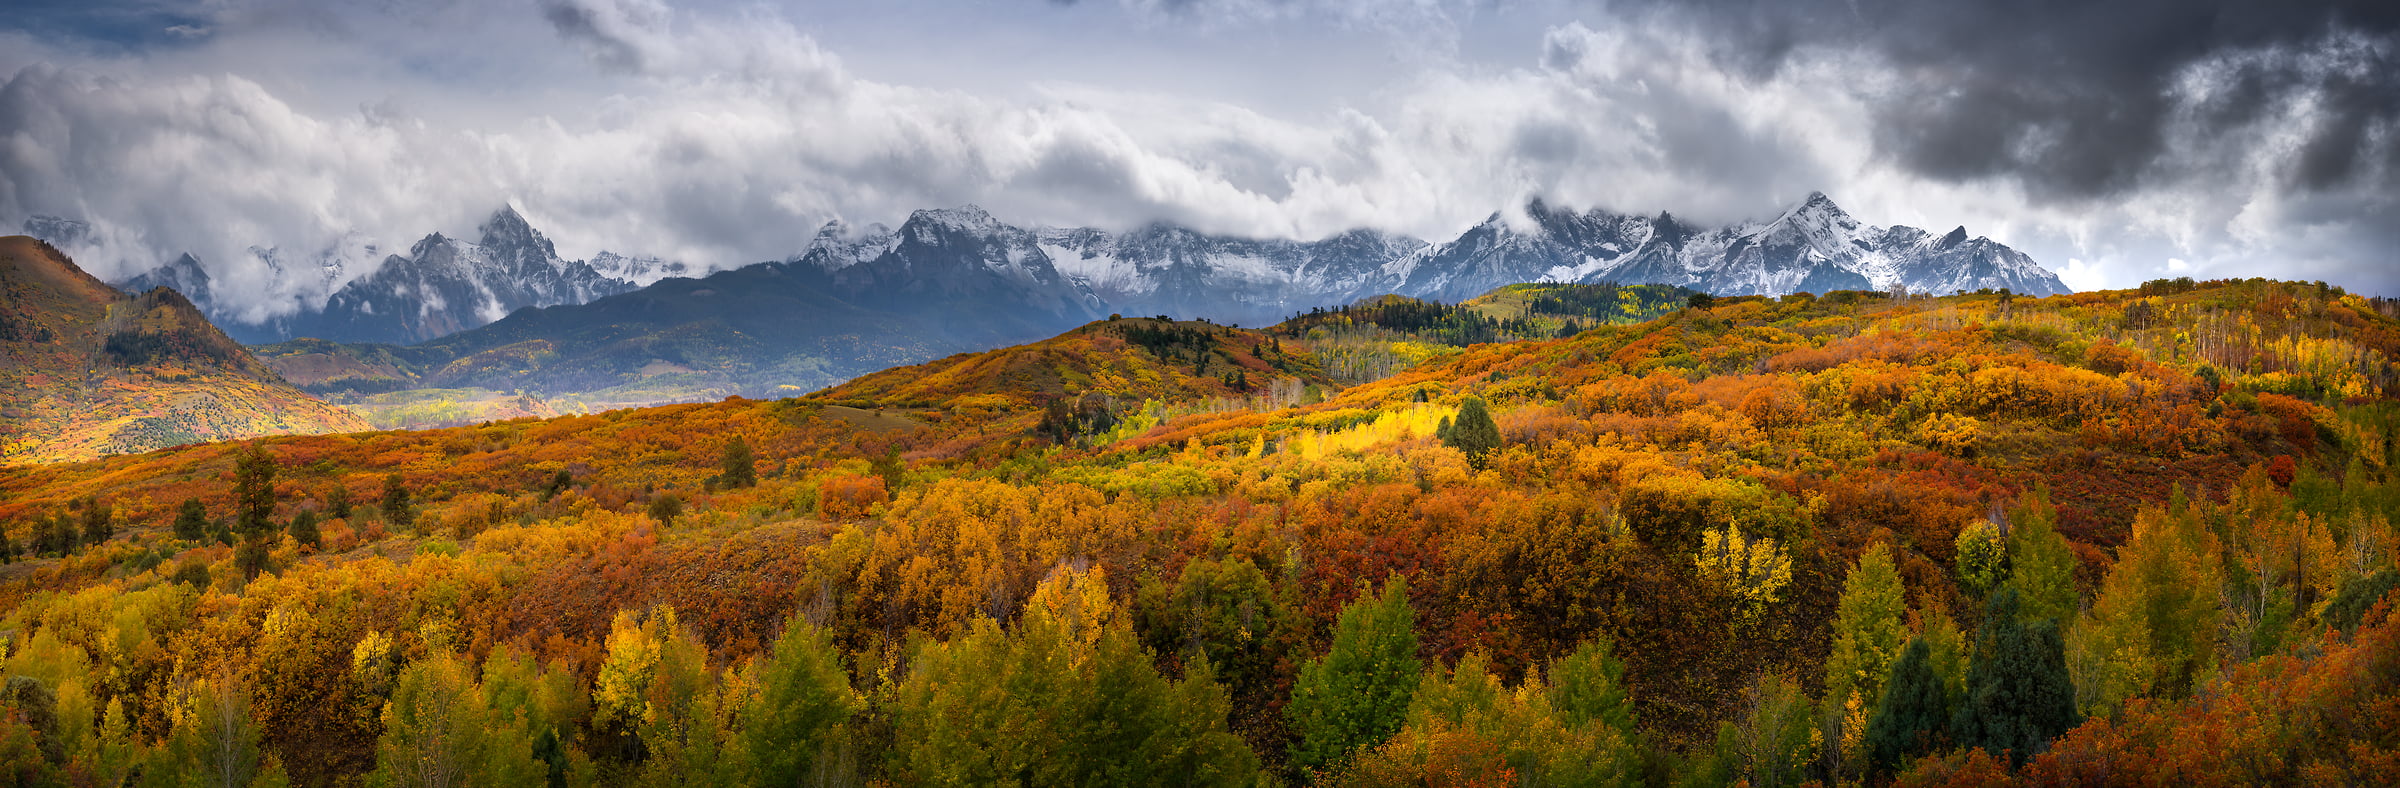 778 megapixels! A very high resolution, large-format VAST photo print of an autumn foliage landscape; photograph created by Jeff Lewis in Ridgway, Colorado